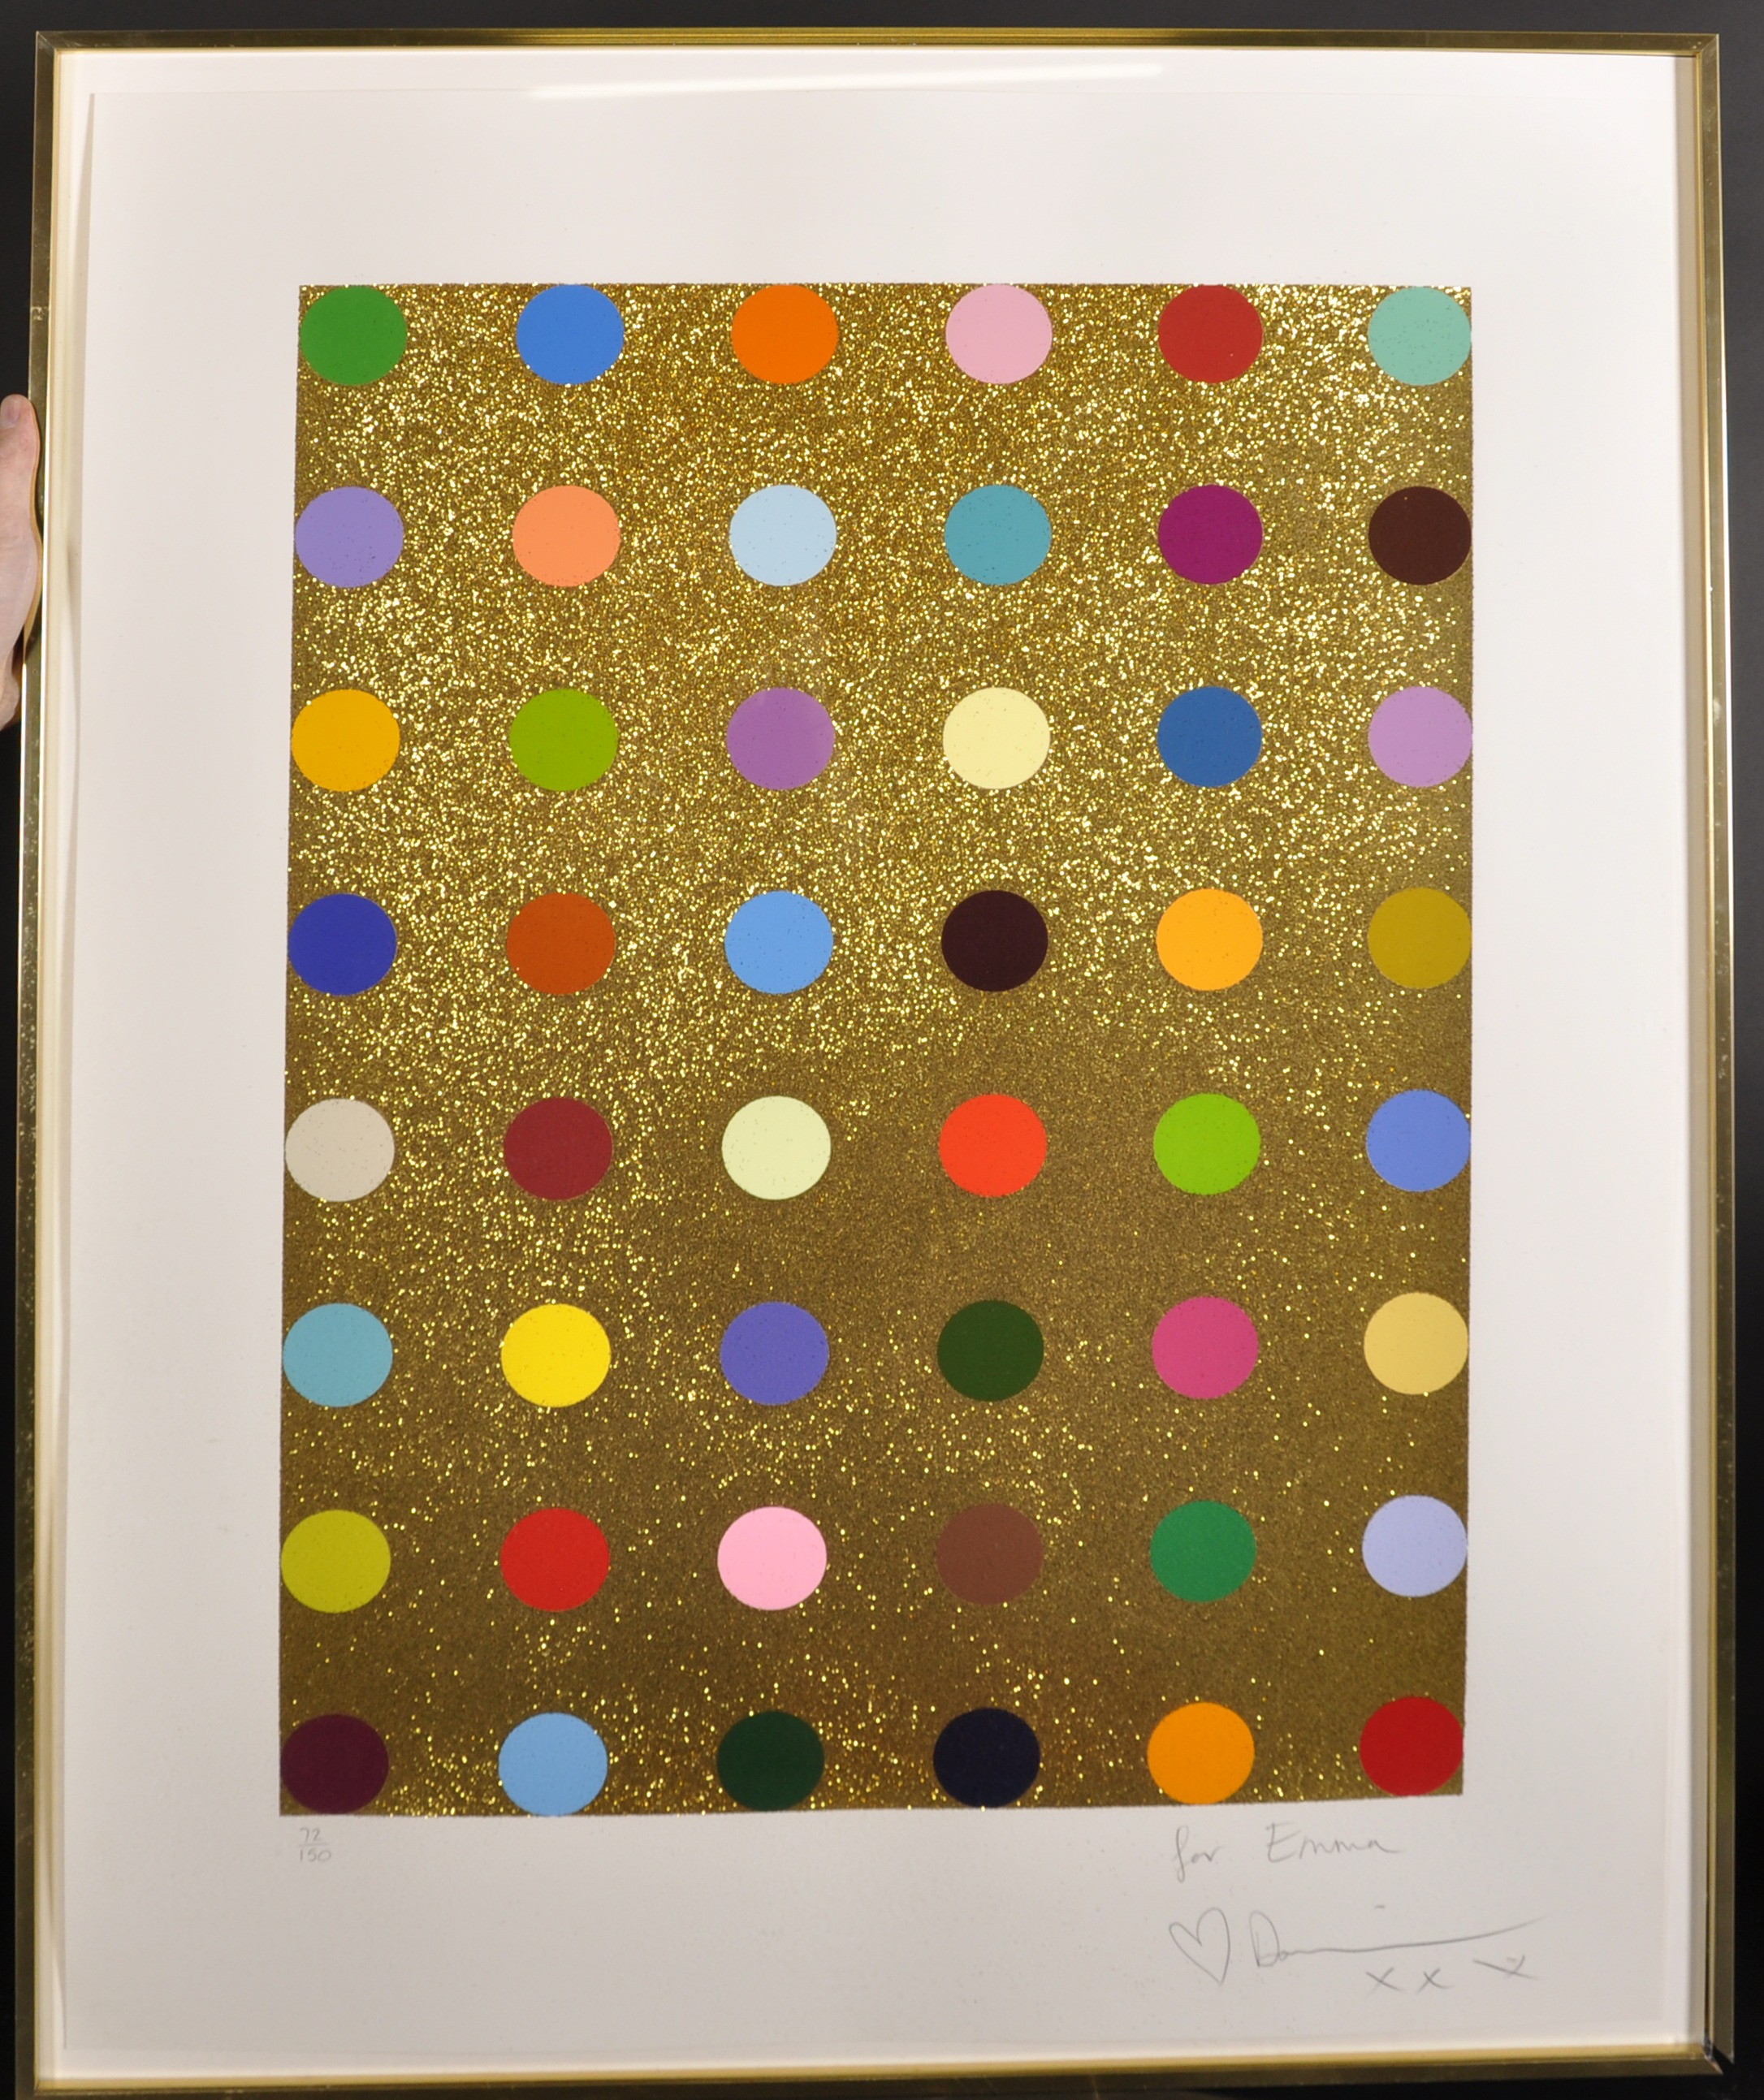 Damien Hirst (1965- ) British. "Spot" with Forty Eight Colour Spots on a Gold Glitter background, - Image 2 of 4